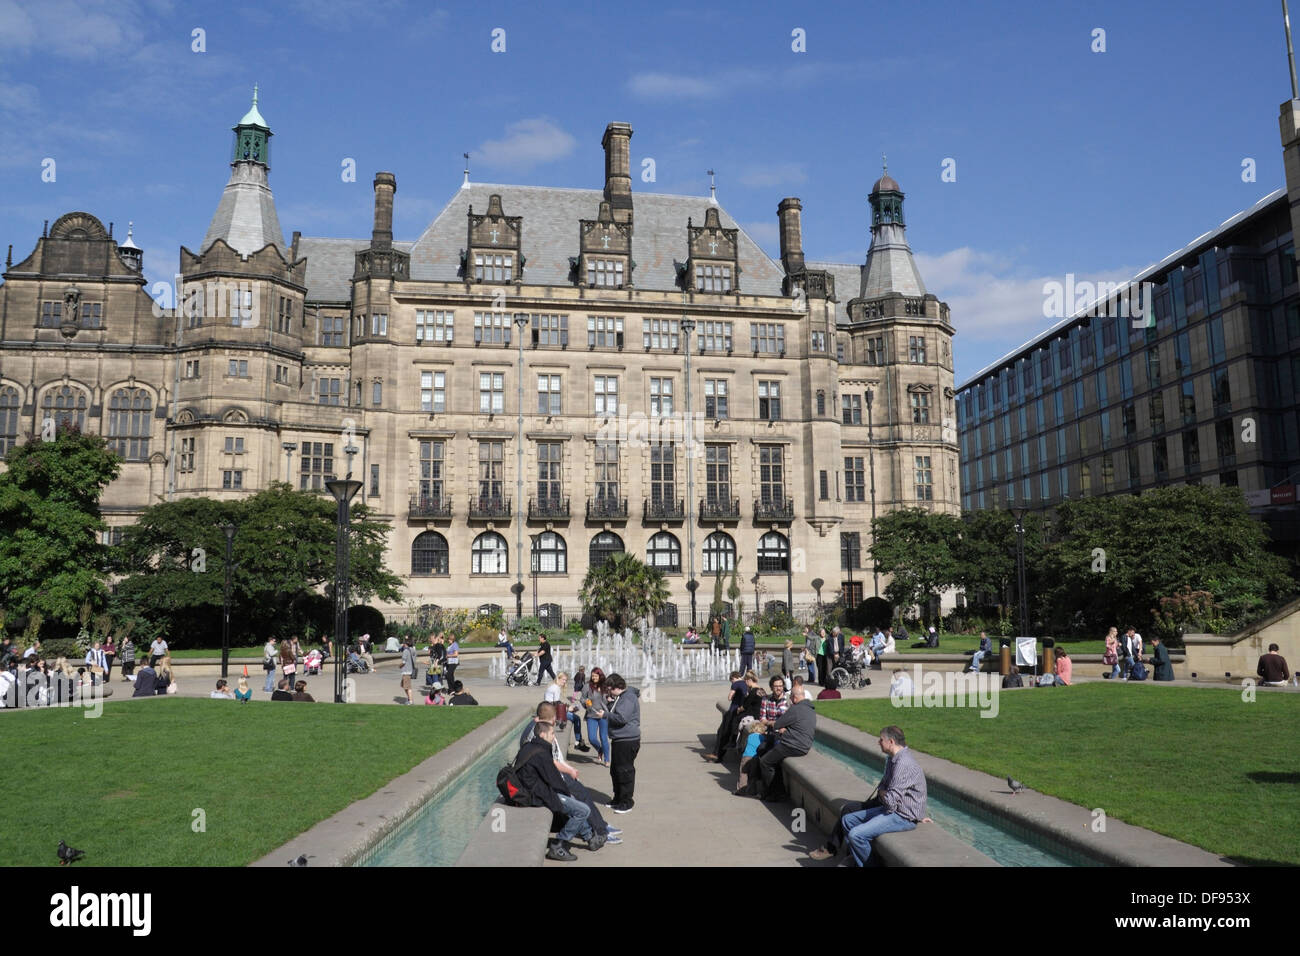 Sheffield Town Hall and the Peace Gardens, Sheffield City centre England. victorian architecture. Grade 1 listed building public space Stock Photo